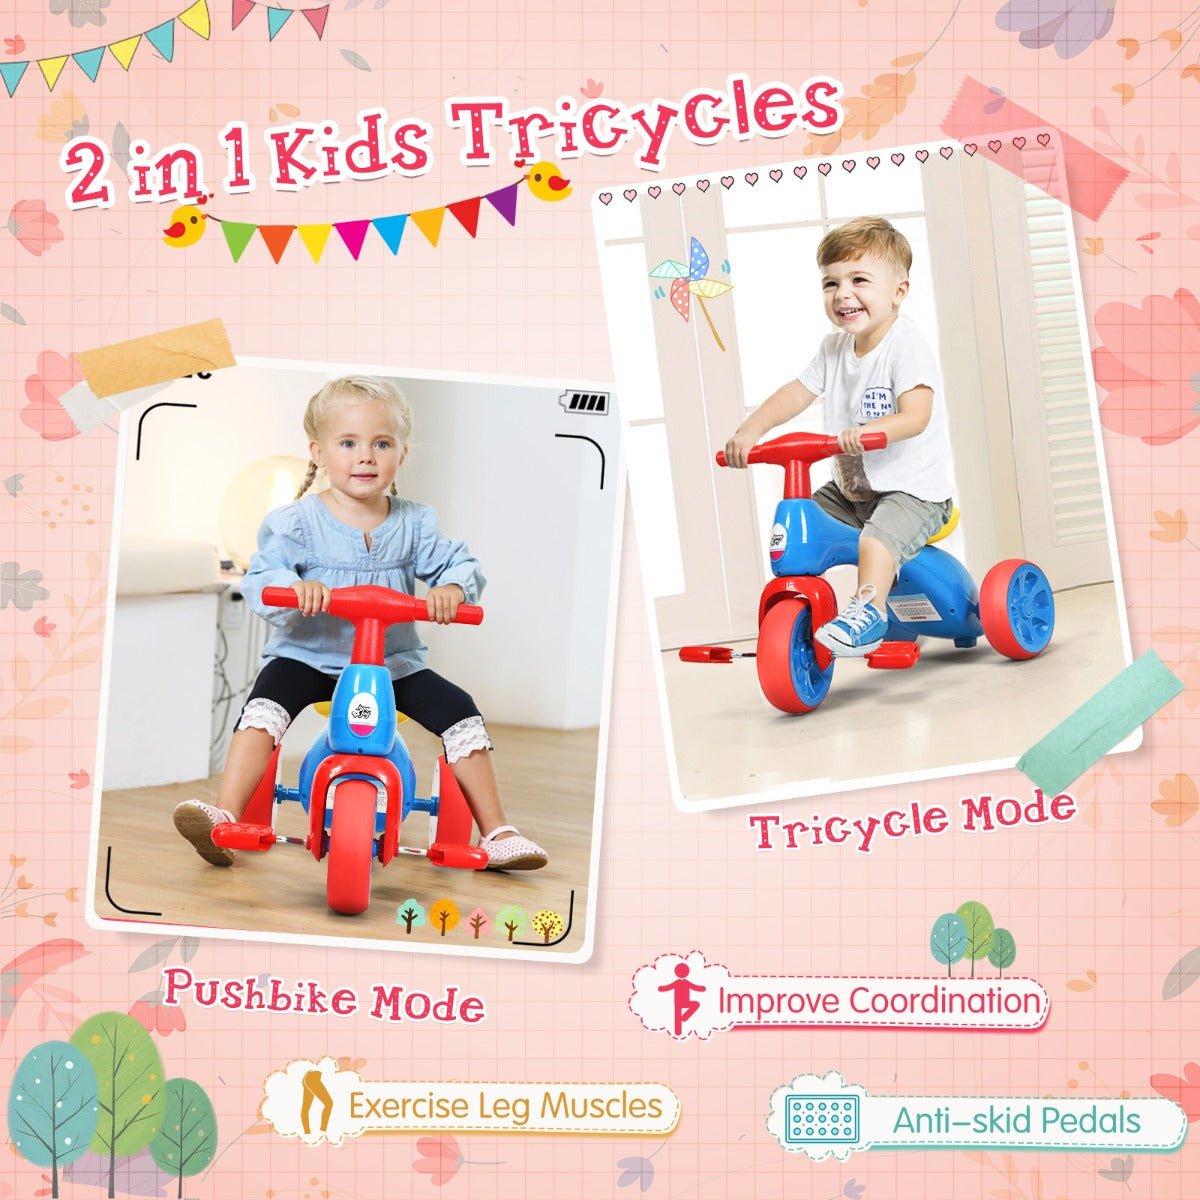 Pedal-Powered Excitement: Blue Toddler Tricycle with Foot Pedals for Kids